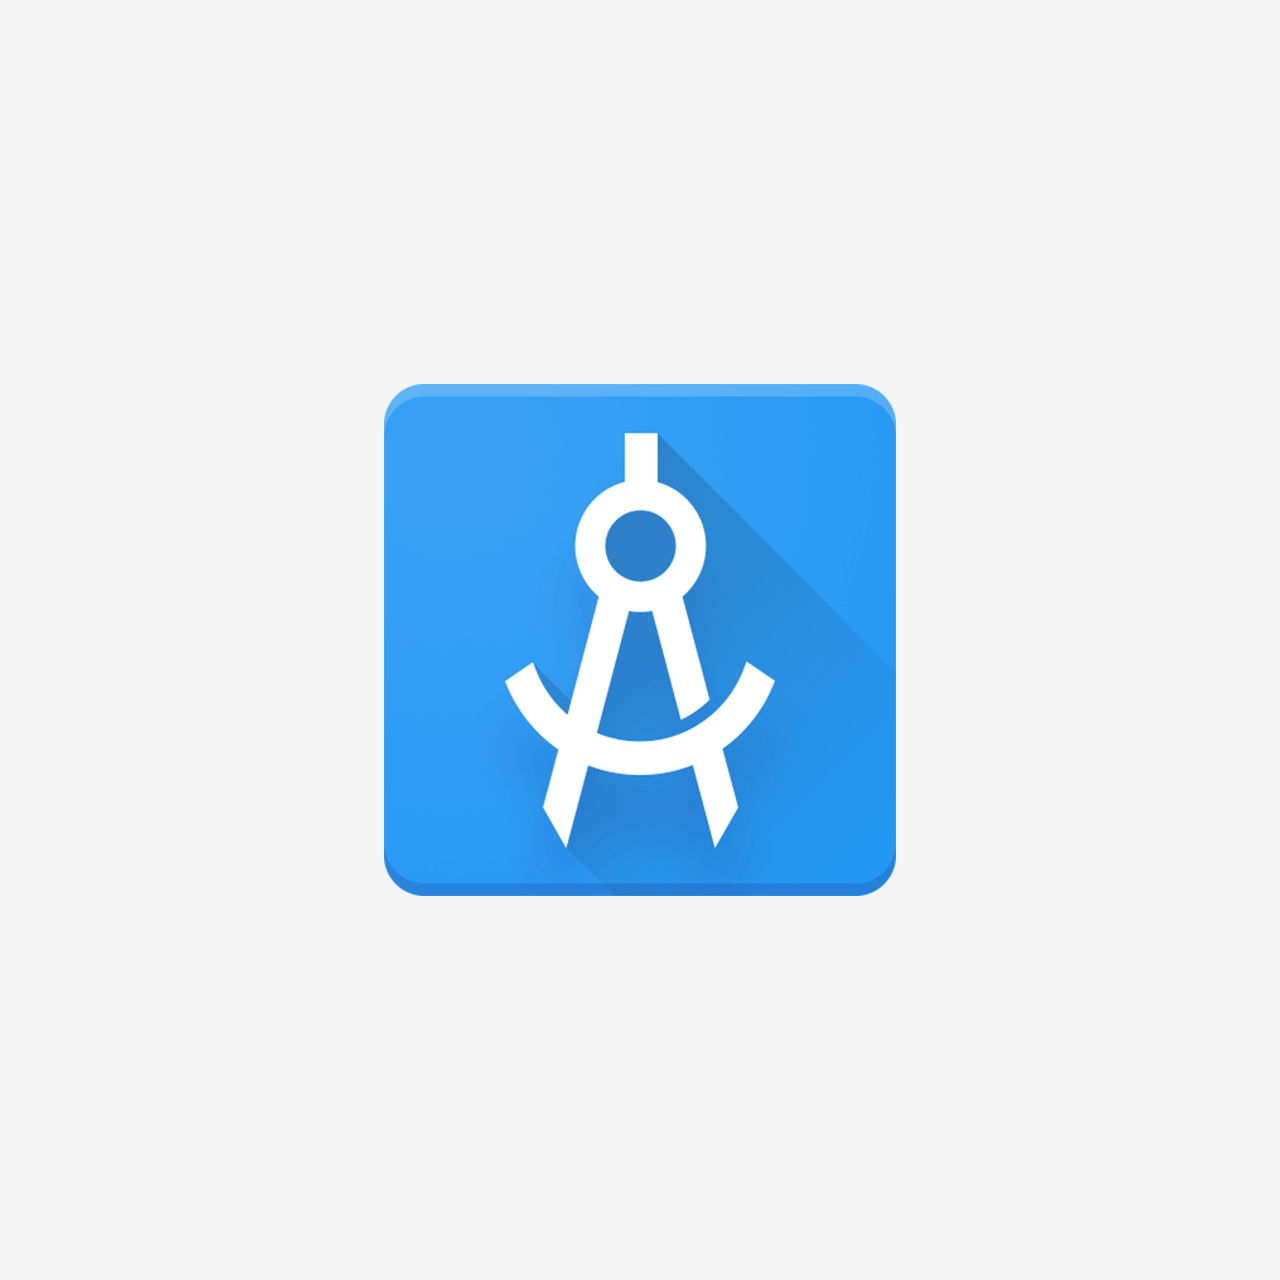 android icon 256x256px (ico, png, icns) - free download | Icons101.com